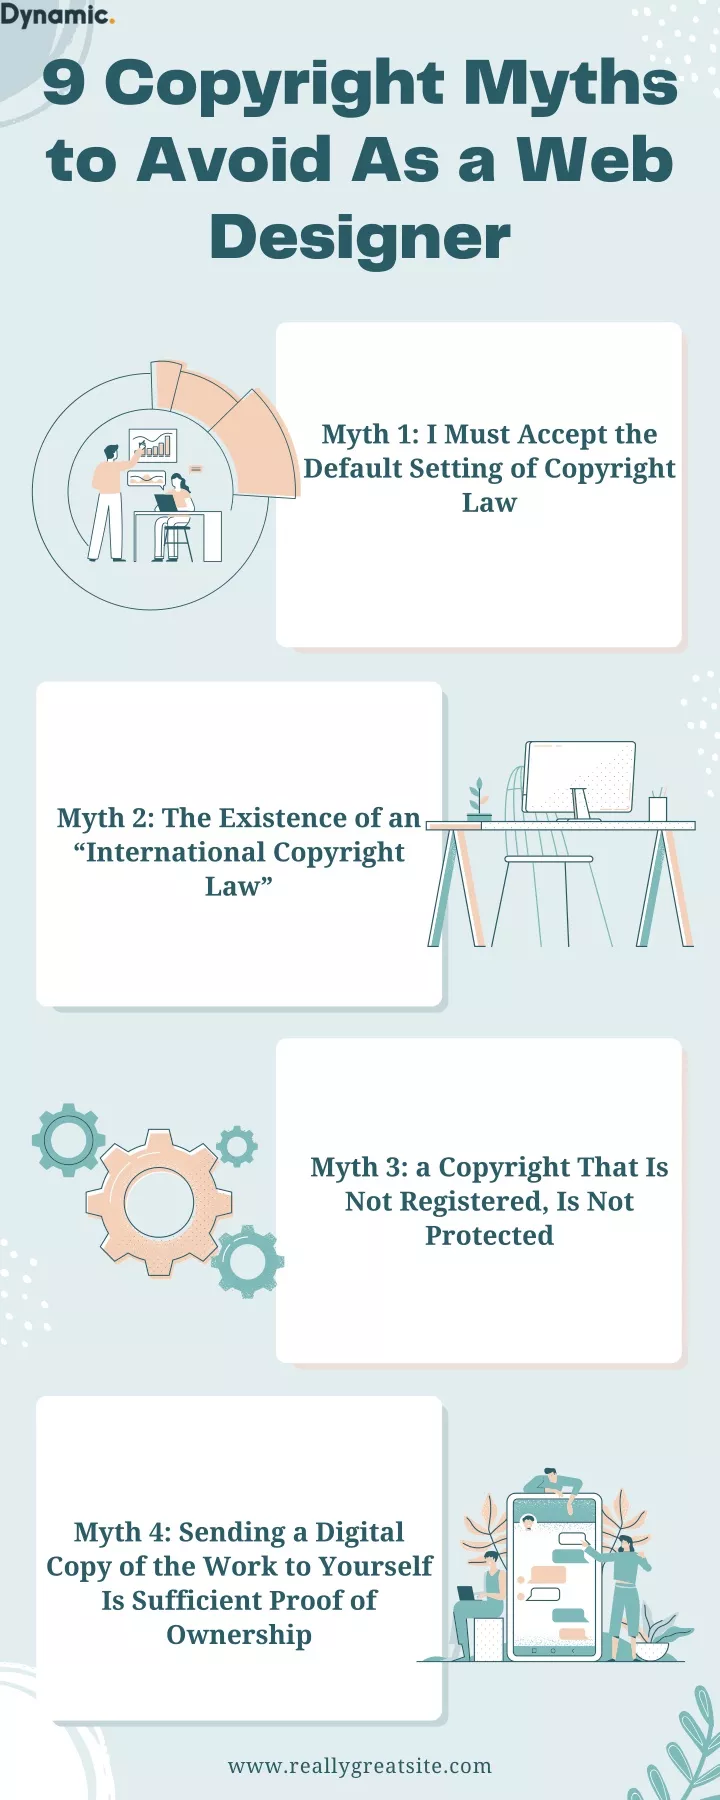 9 copyright myths to avoid as a web designer